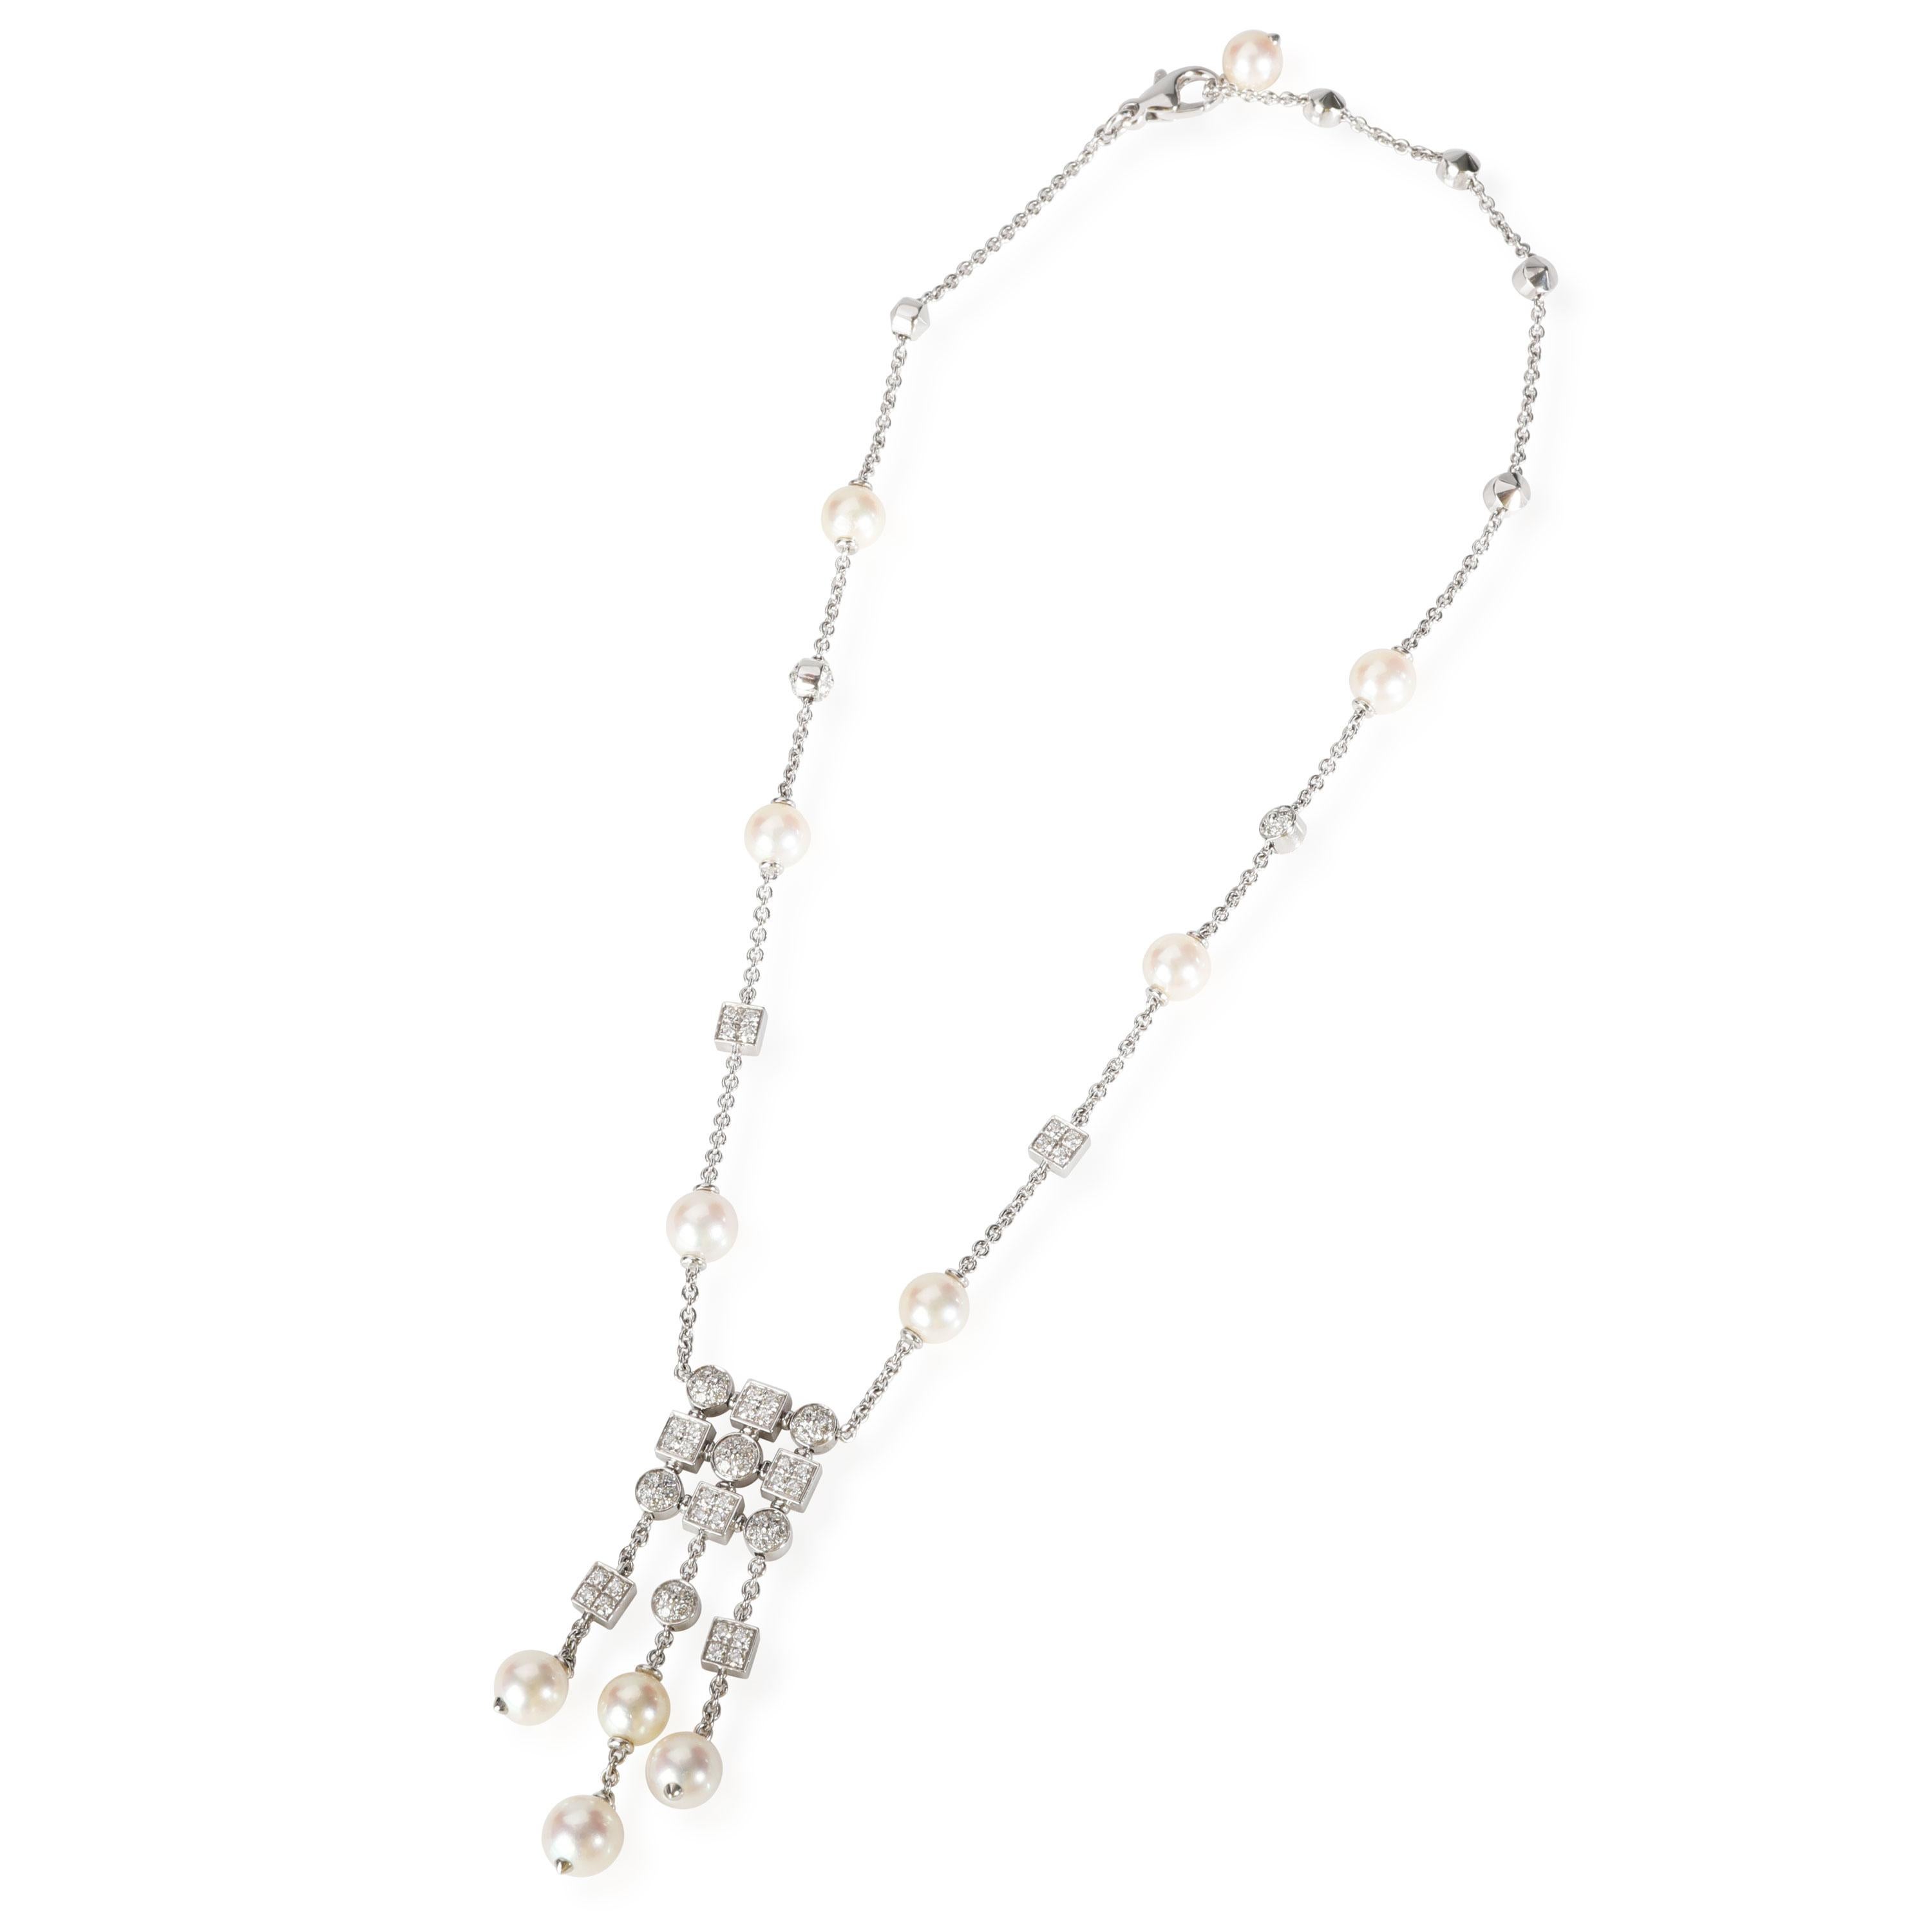 Bulgari Lucea Pearl Diamond Necklace in 18K White Gold 1.56 CTW

PRIMARY DETAILS
SKU: 111785
Listing Title: Bulgari Lucea Pearl Diamond Necklace in 18K White Gold 1.56 CTW
Condition Description: Retails for 18,500 USD. In excellent condition and